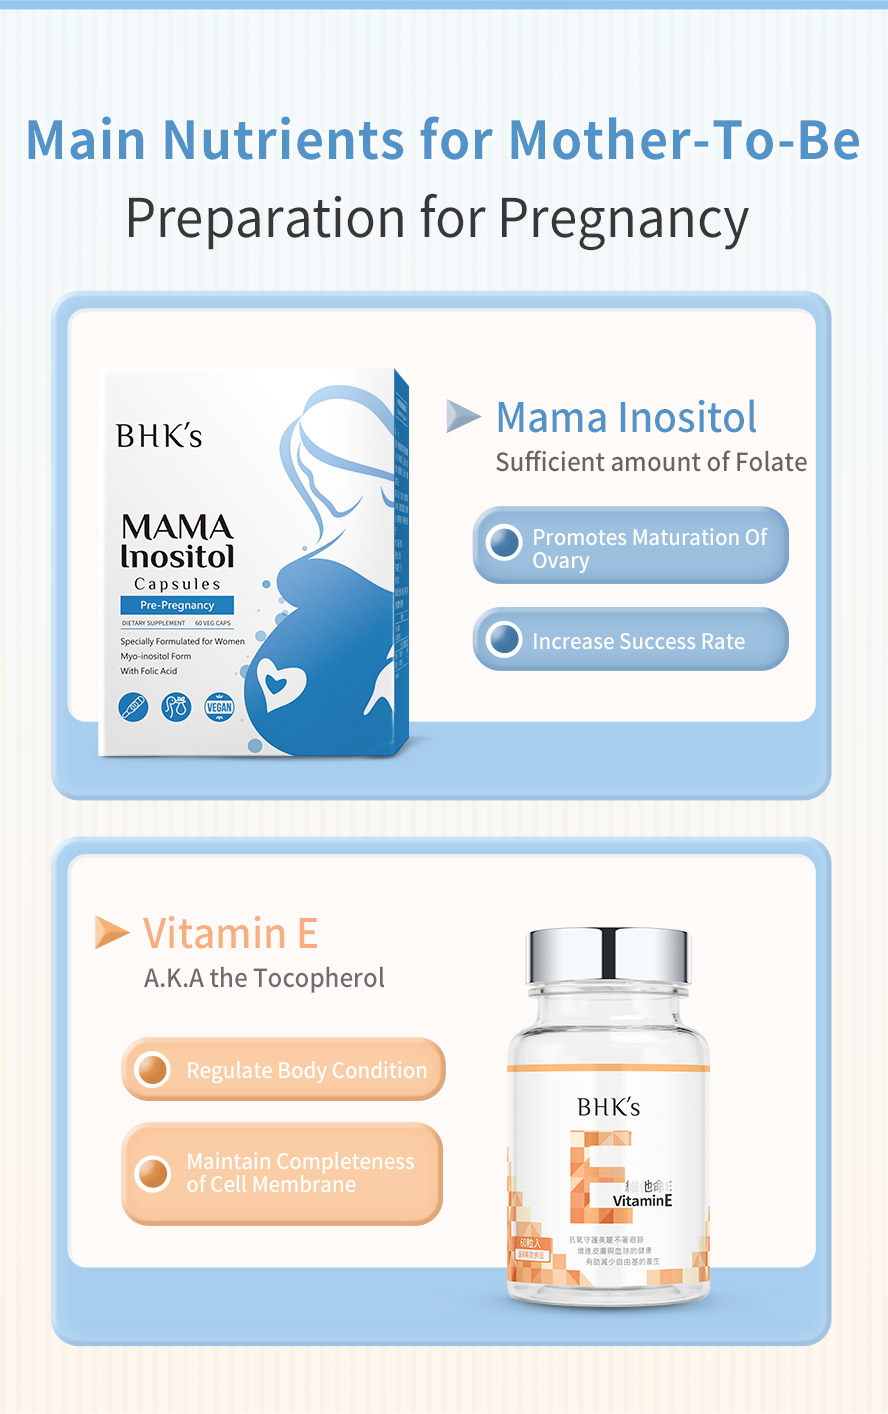 BHK's Inositol Vitamin E are the essential nutrition to regulate physical condition to prepare for pregnancy with healthy cell membrane and promote maturation of ovary